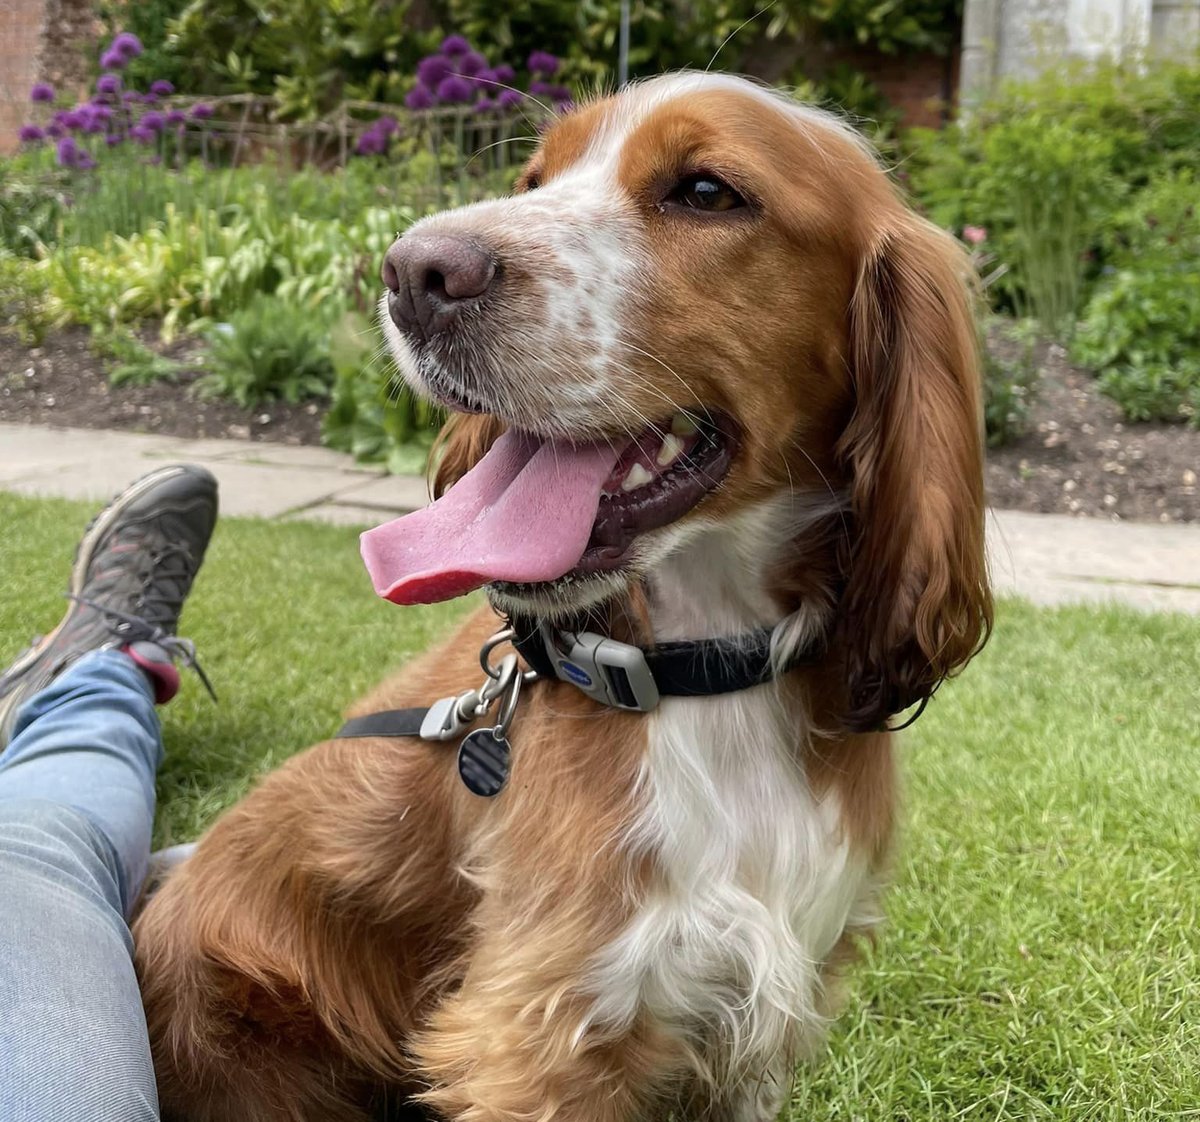 Good morning from the beautiful Verity 🥰

Verity is a very clever cocker spaniel, who has recently passed her assessment to be a life-changing hearing dog